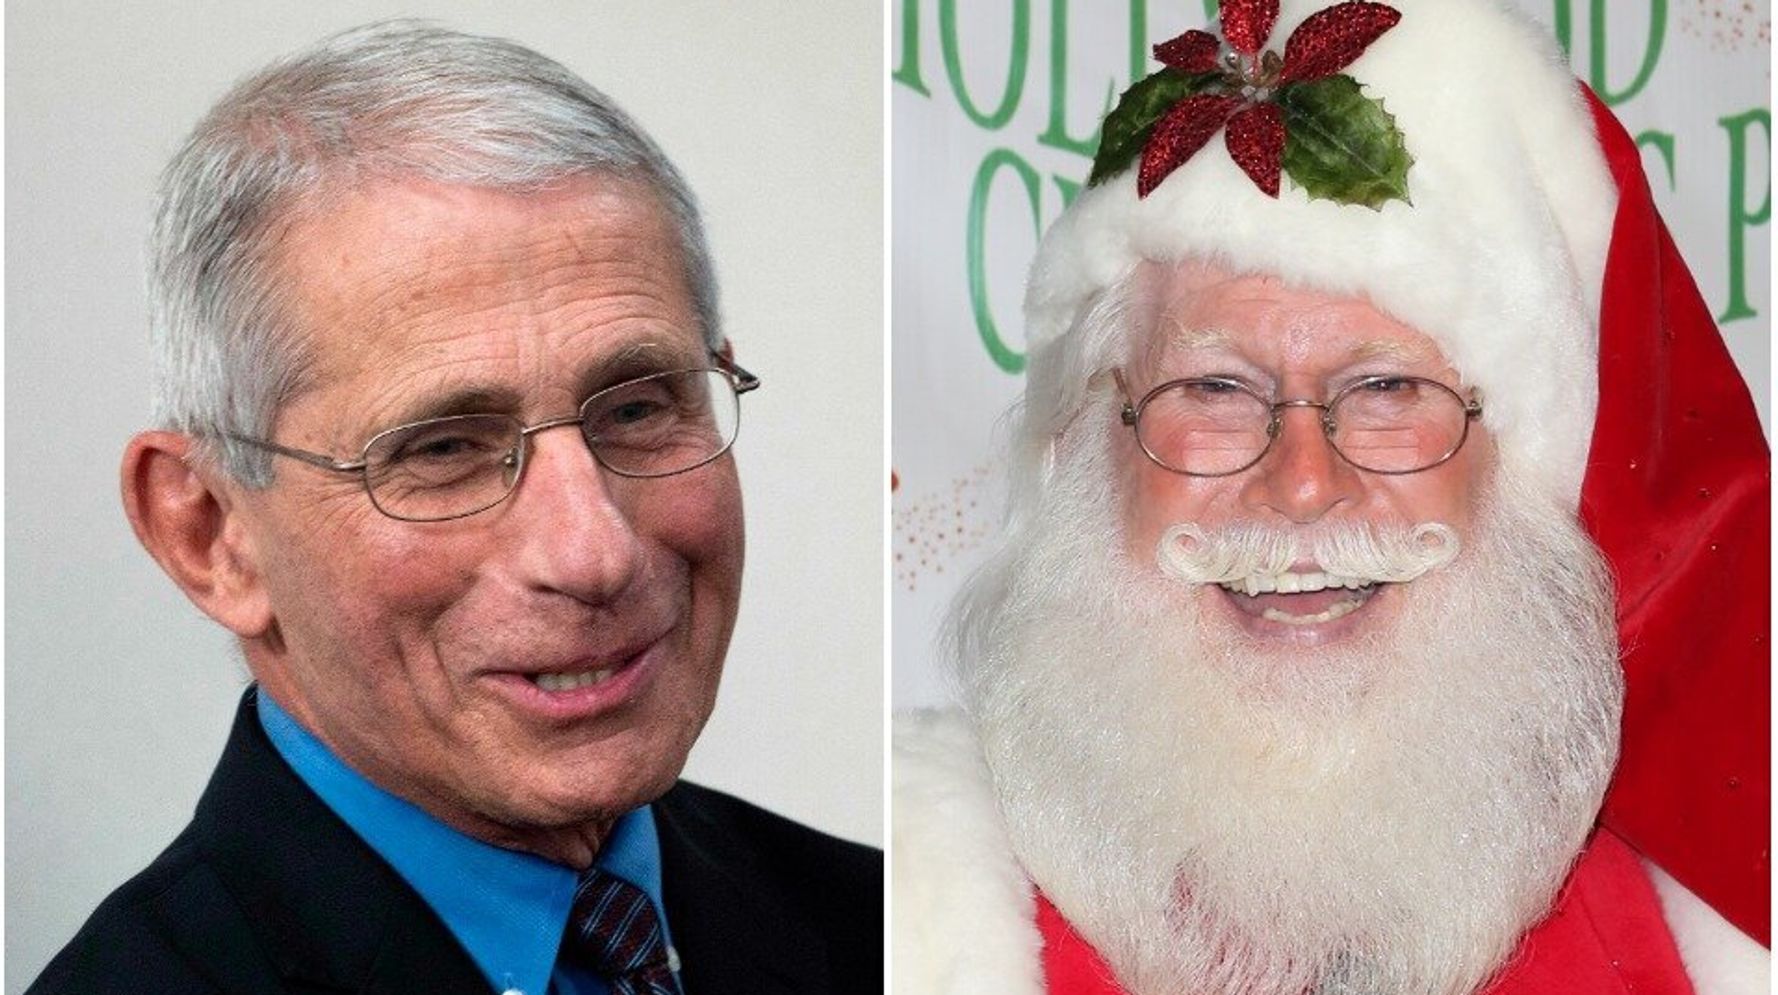 Fauci Says Santa Claus Has ‘Innate Immunity’ And Can’t Spread COVID-19